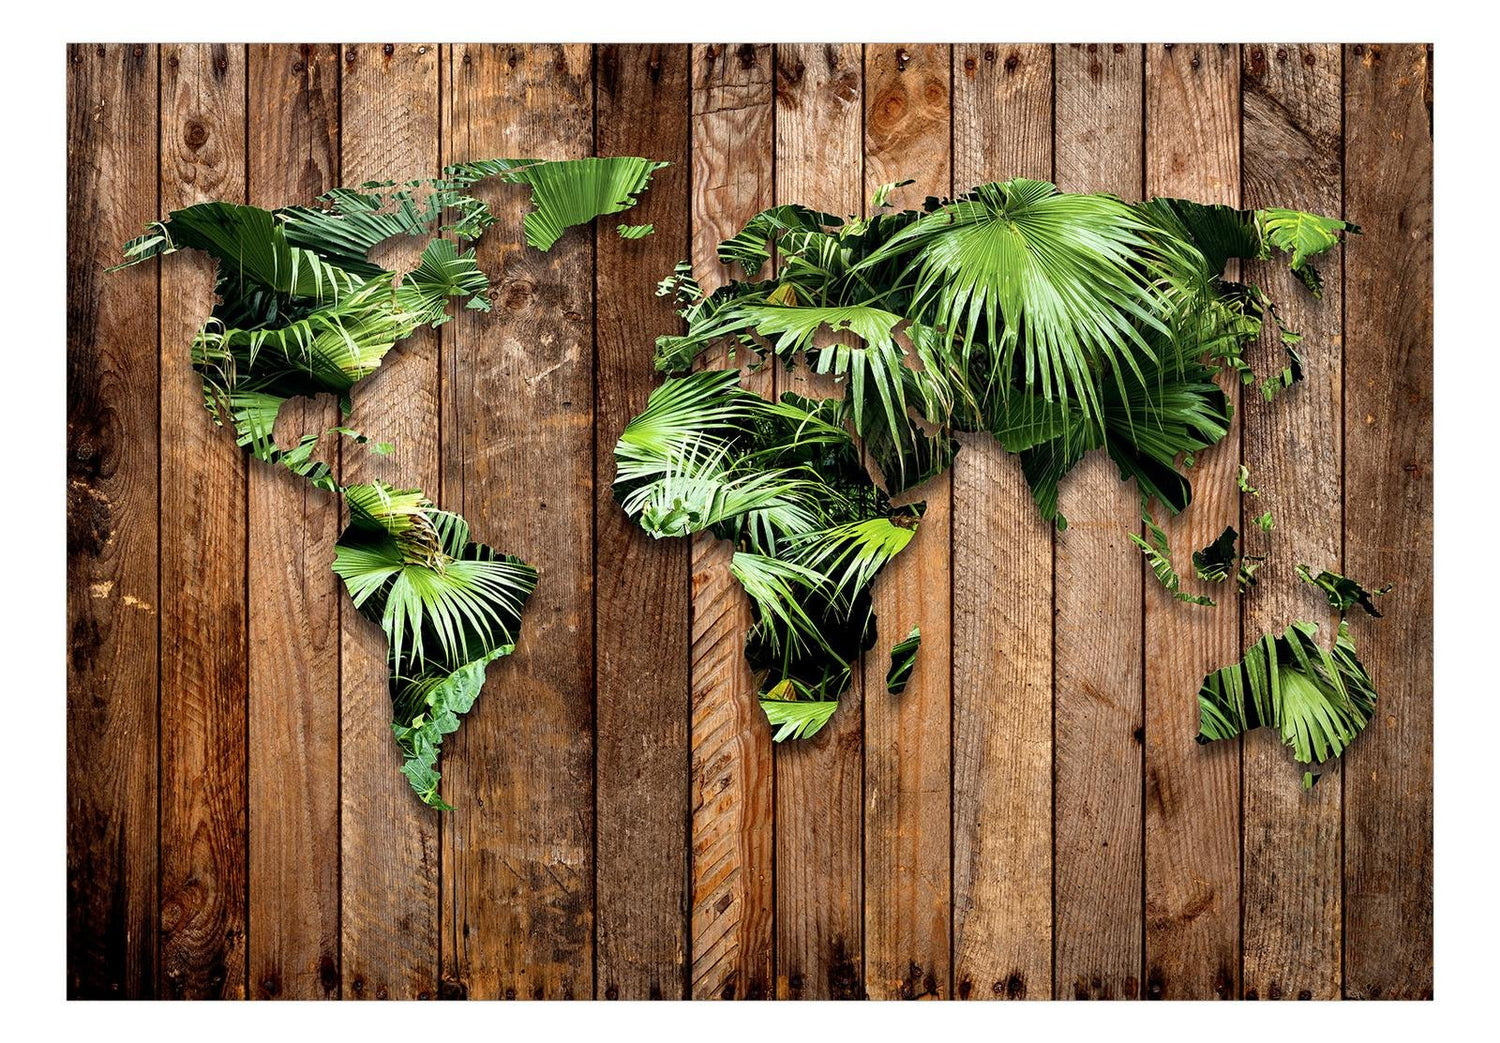 Peel and stick wall mural - Jungle of the World-TipTopHomeDecor